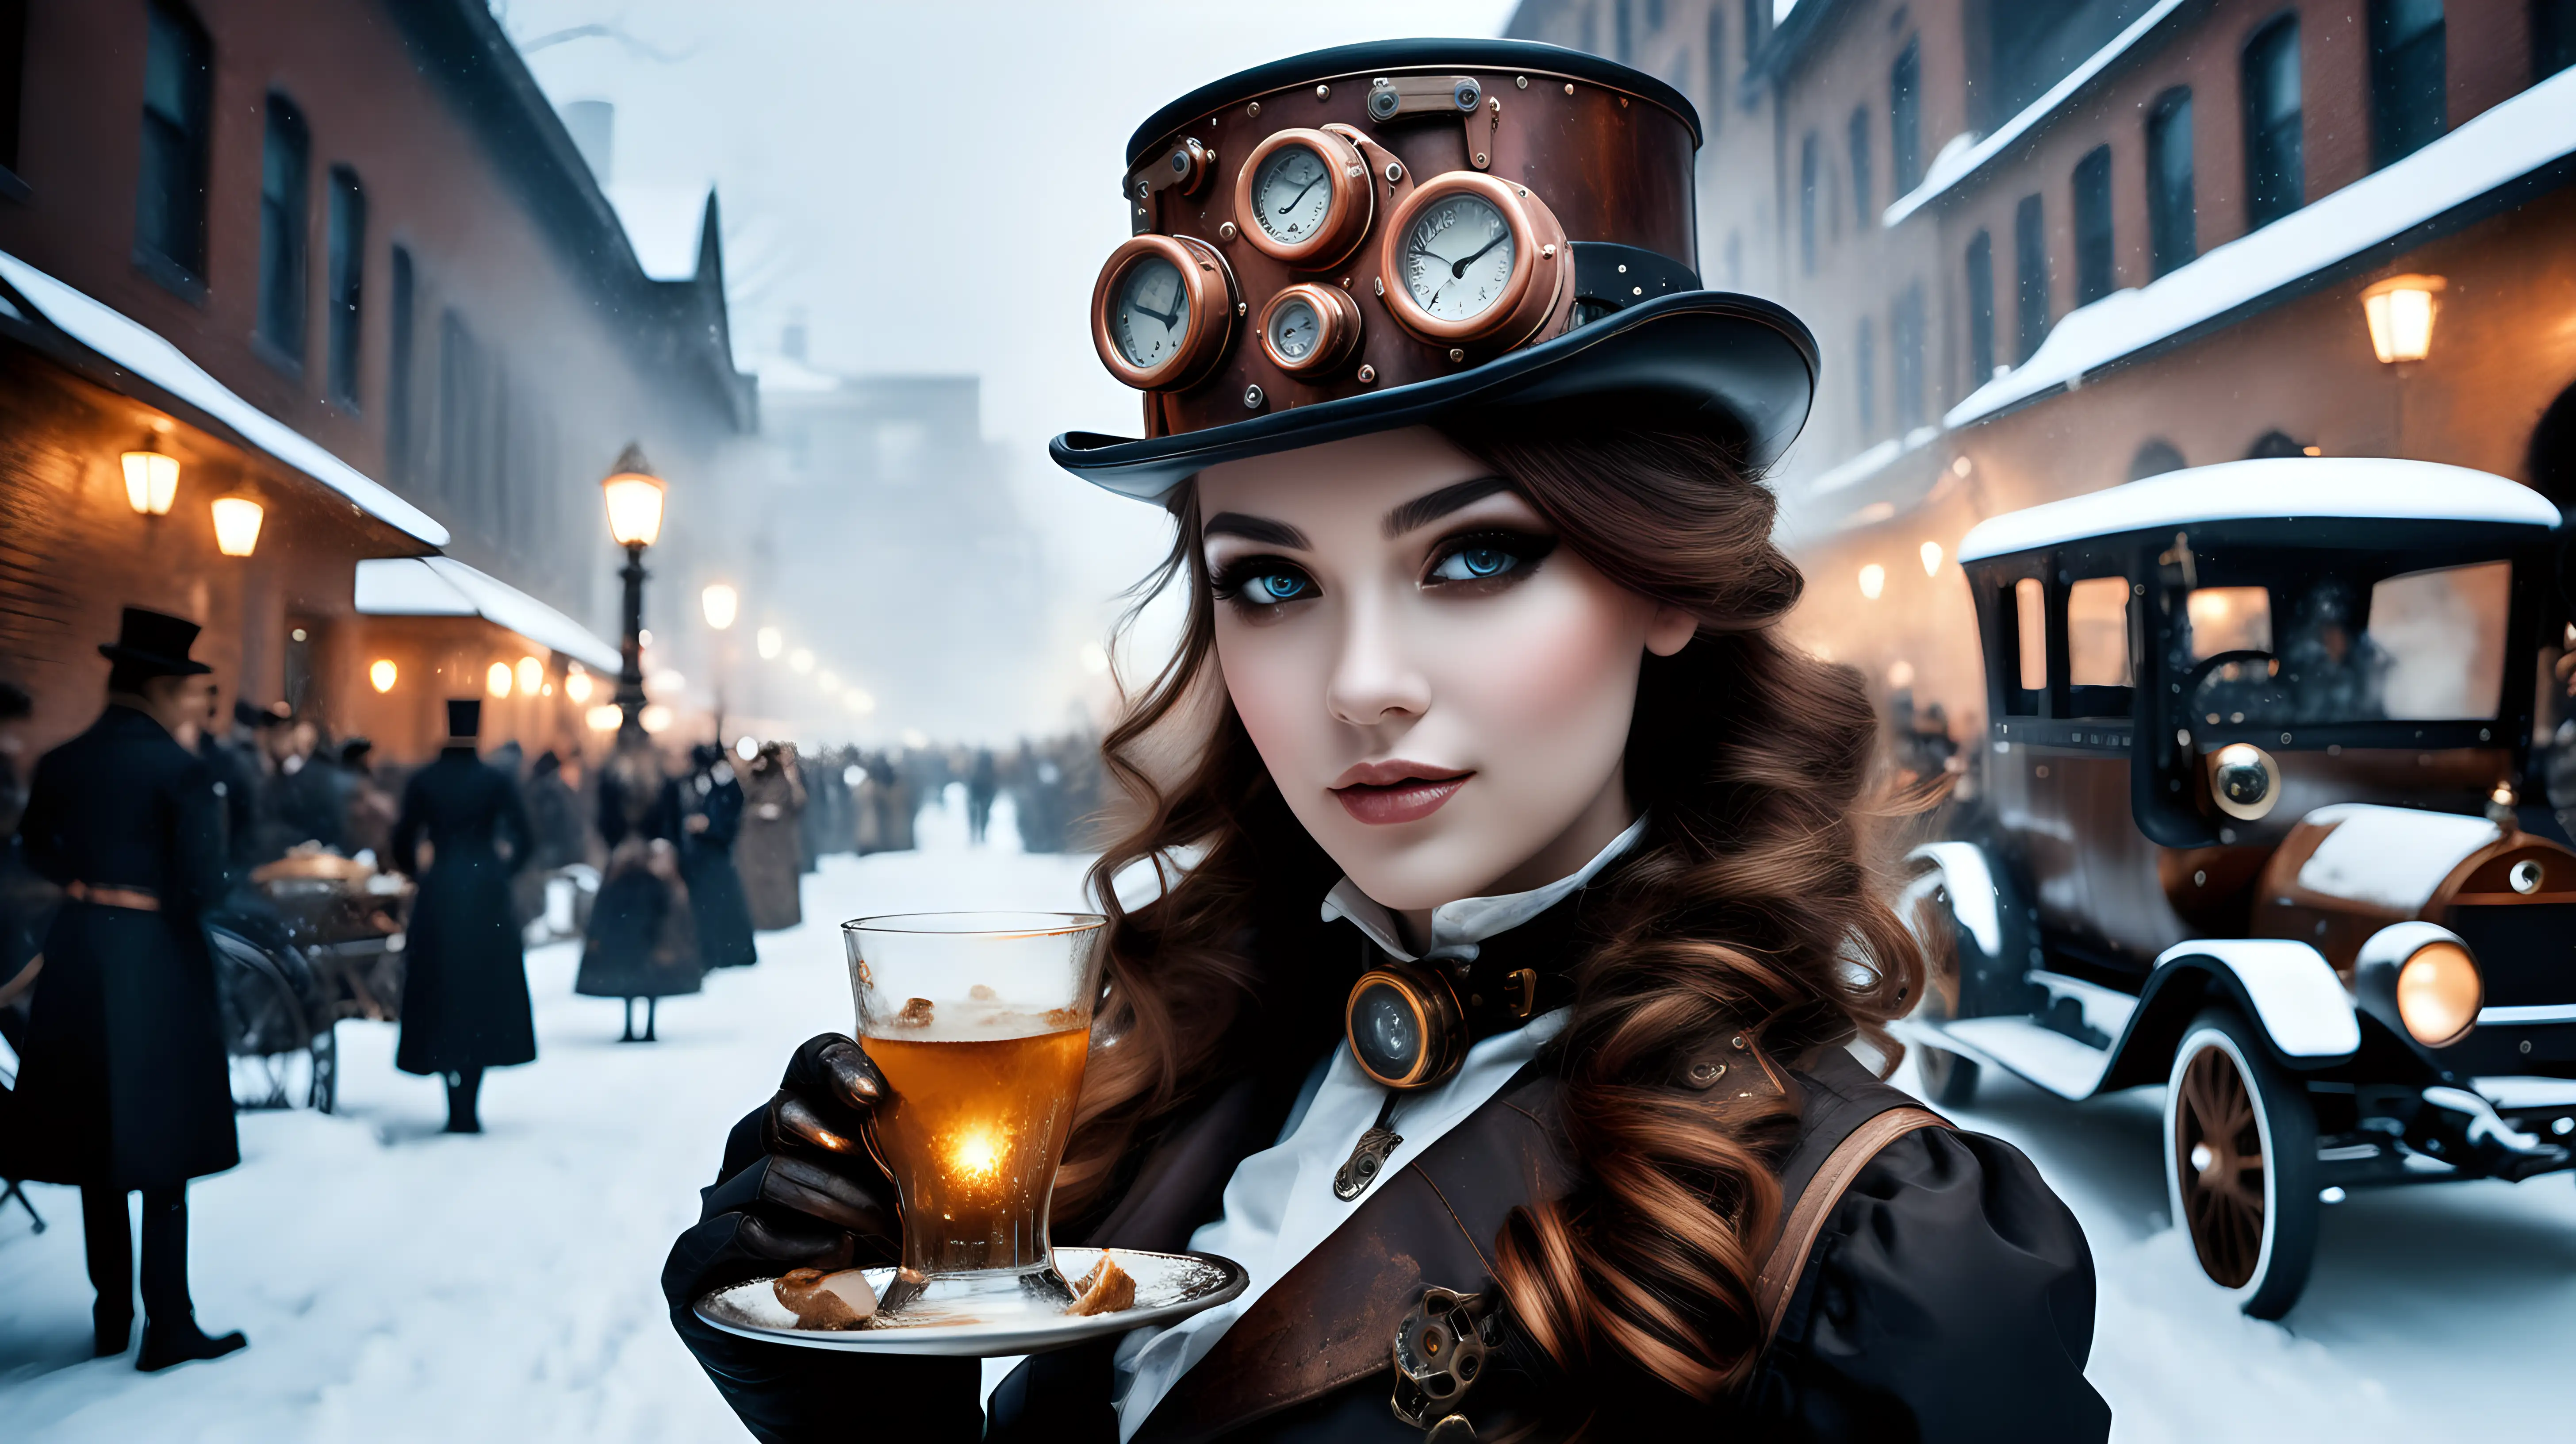 Steampunk Wild Street Party Mesmerizing Winter Beauty Amid Toasting Steam Cars and Soft Light